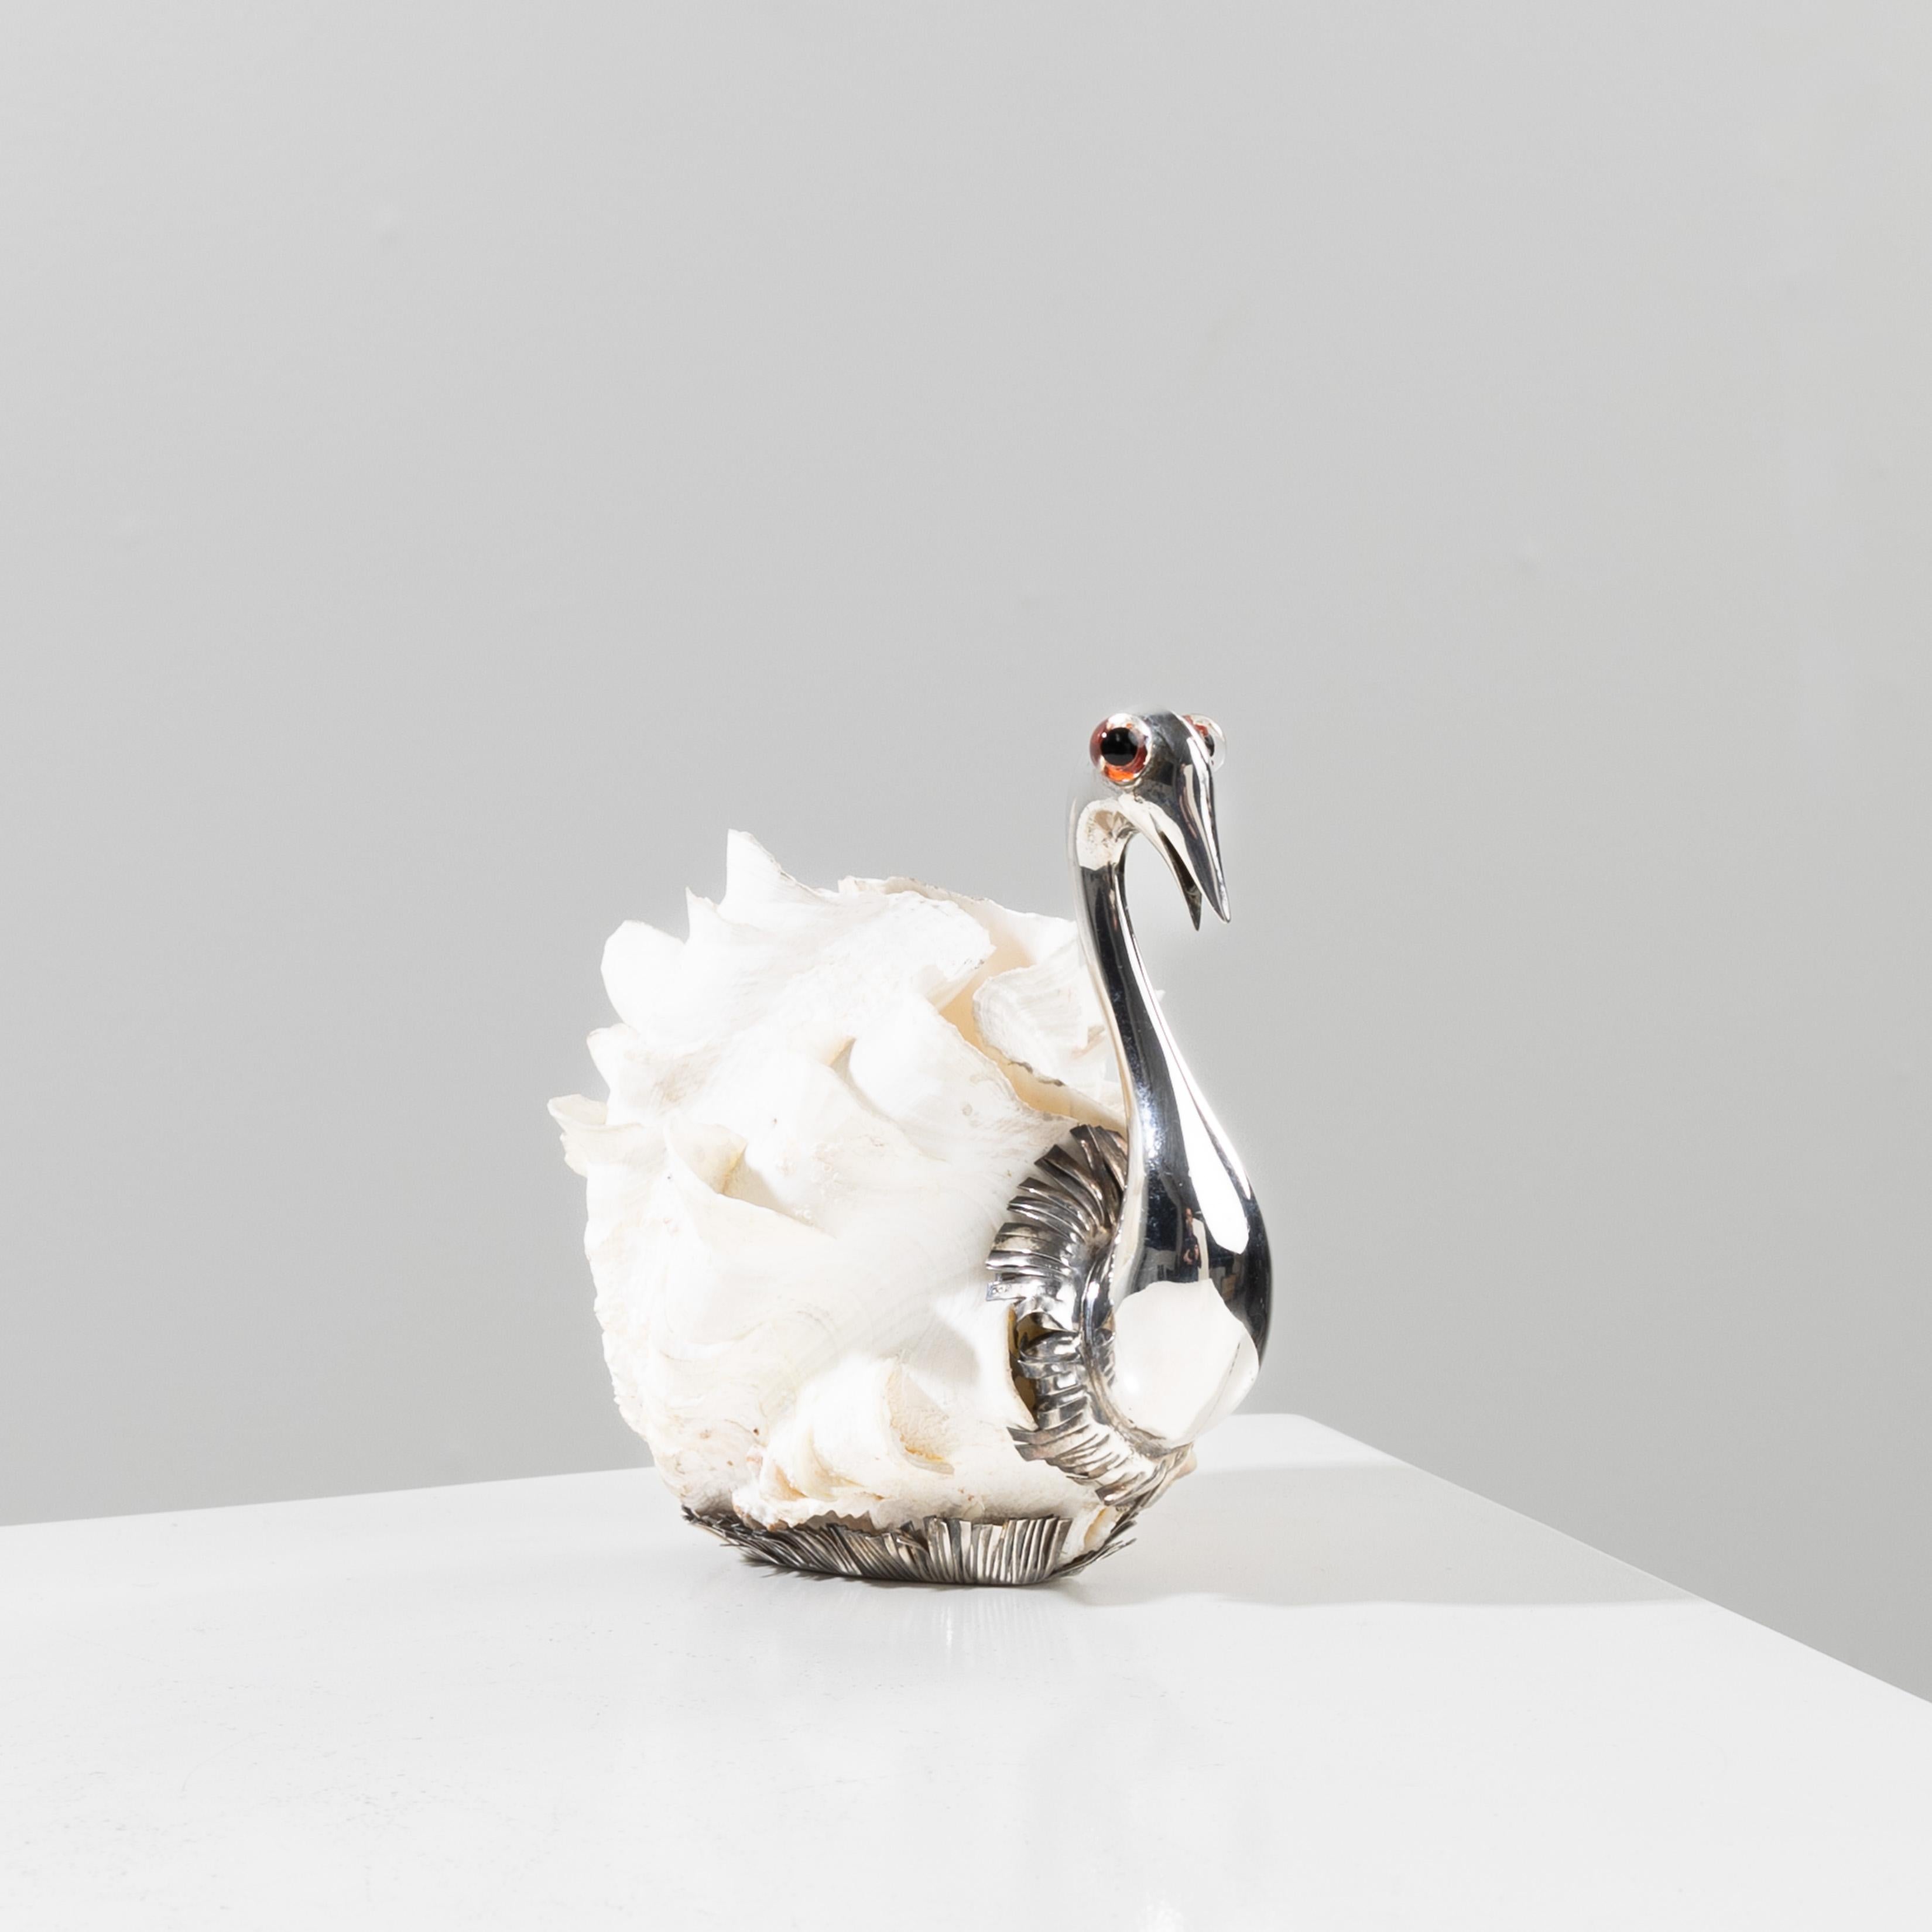 “Swan”, silver sculpture mounted on a shell, by Gabriele De Vecchi.
Sculpture representing a silver swan mounted on a shell forming the body and wings.